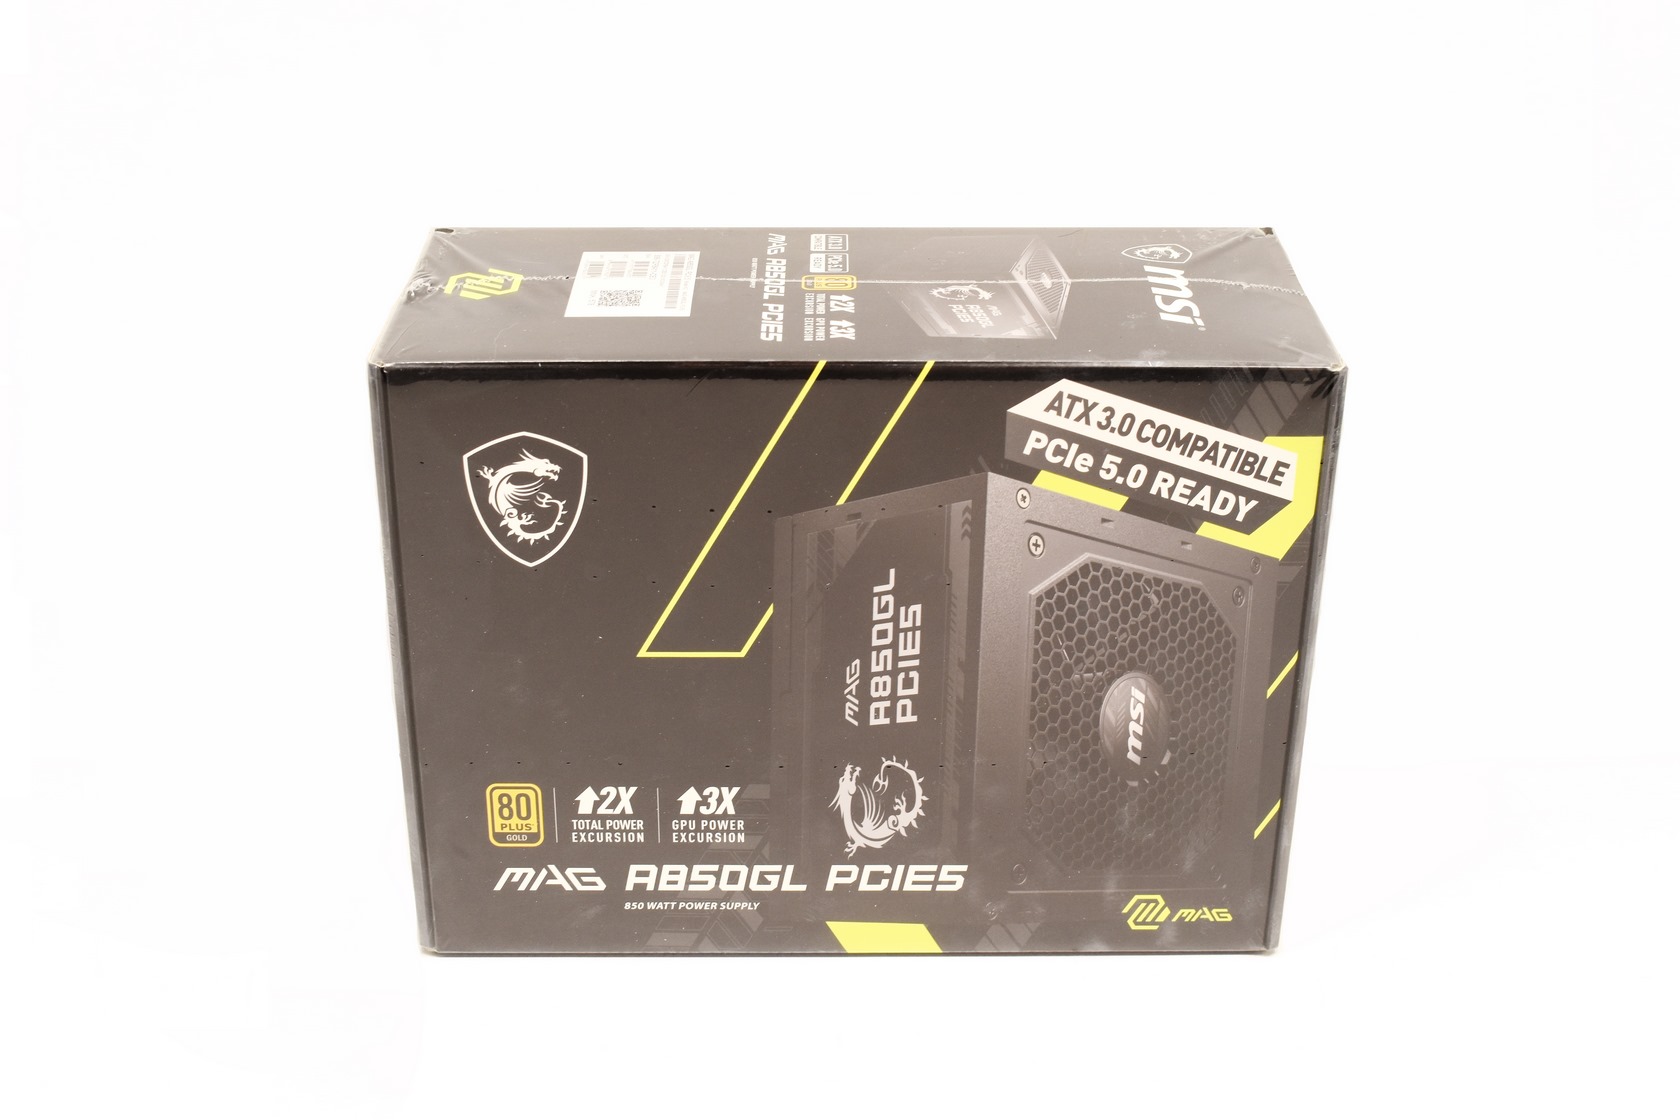 MSI 850W Gold MAG A850GL PC Power Supply